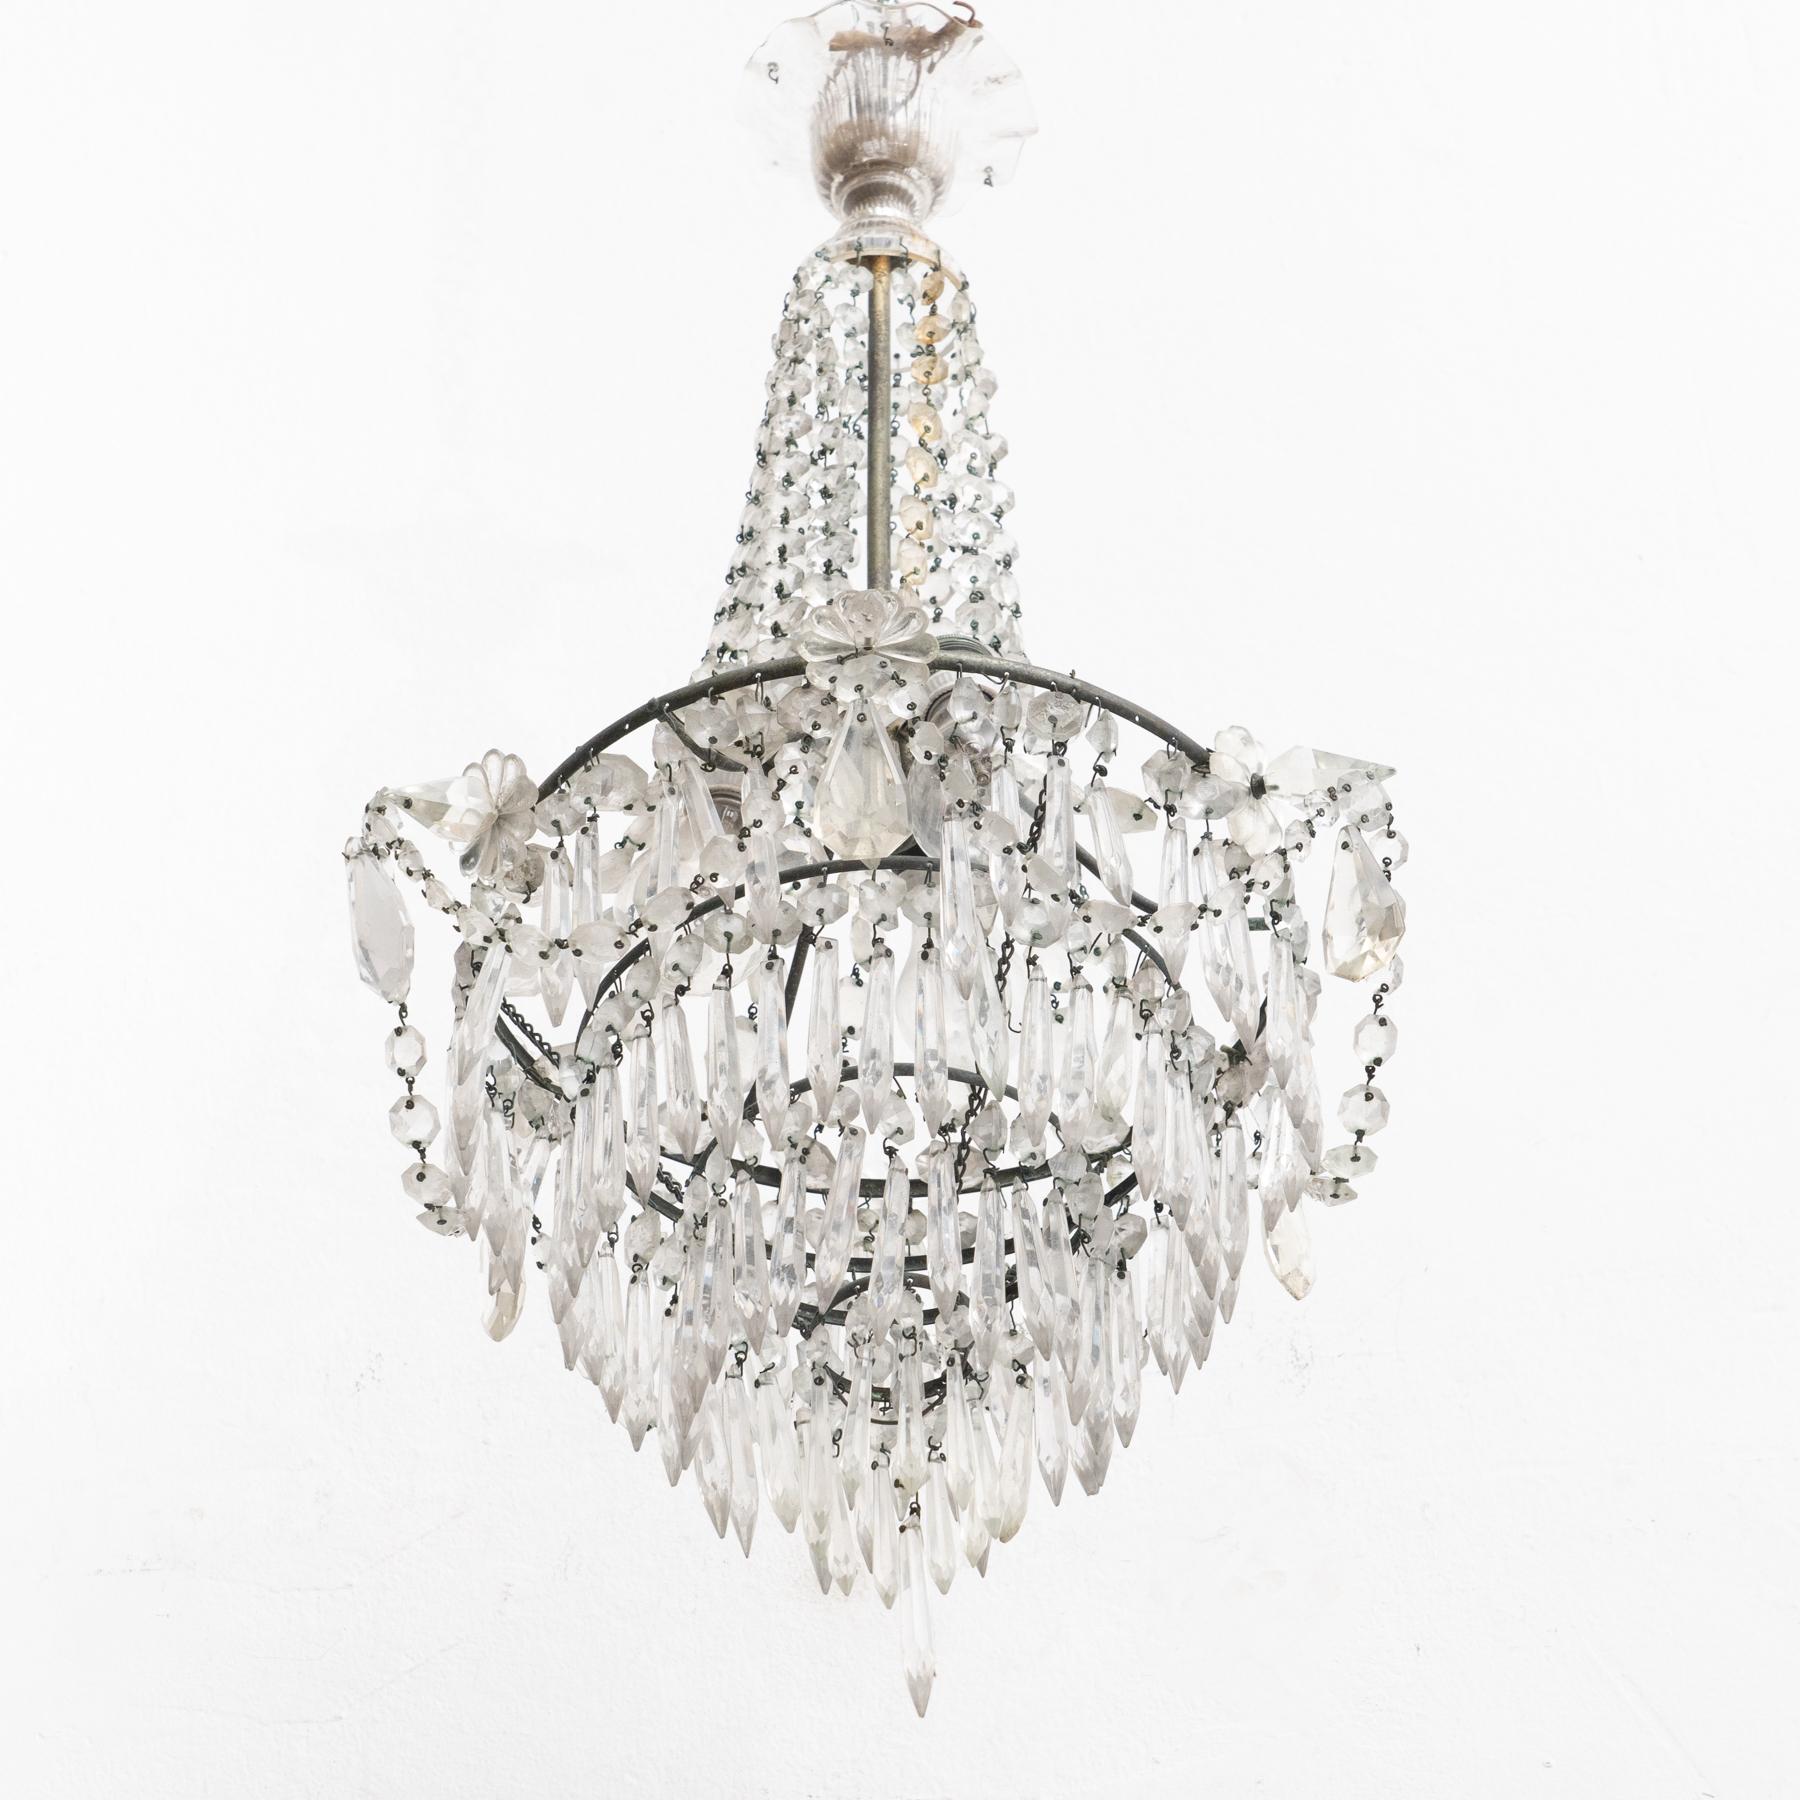 Mid-20th Century Vintage French Metal and Glass Ceiling Lamp circa 1950